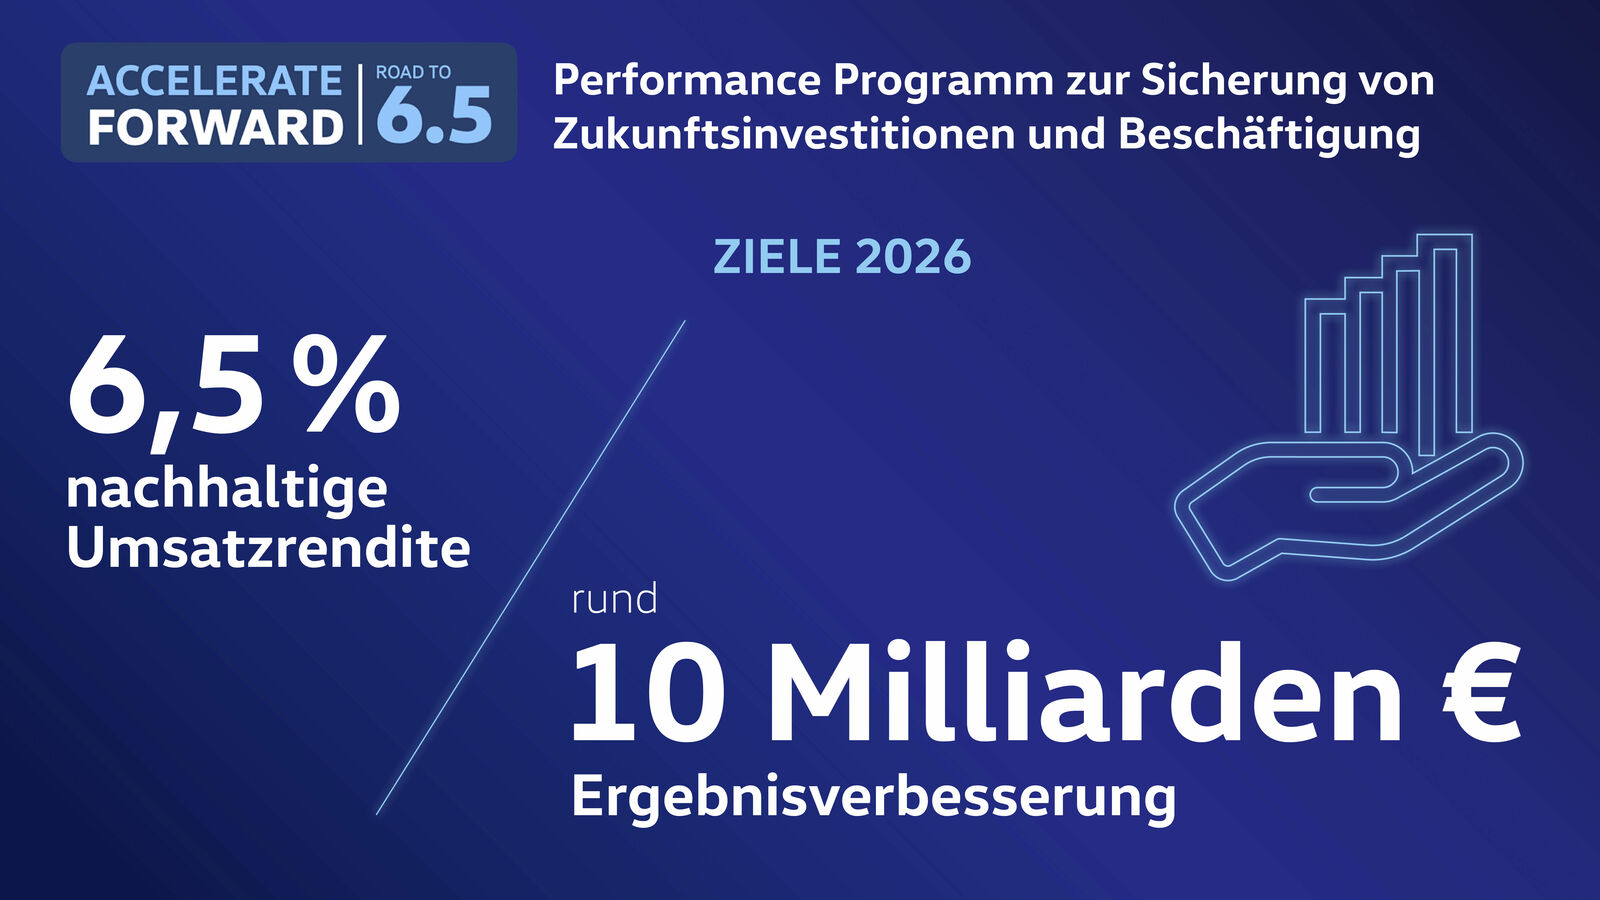 Performance Programm „ACCELERATE FORWARD | Road to 6.5“